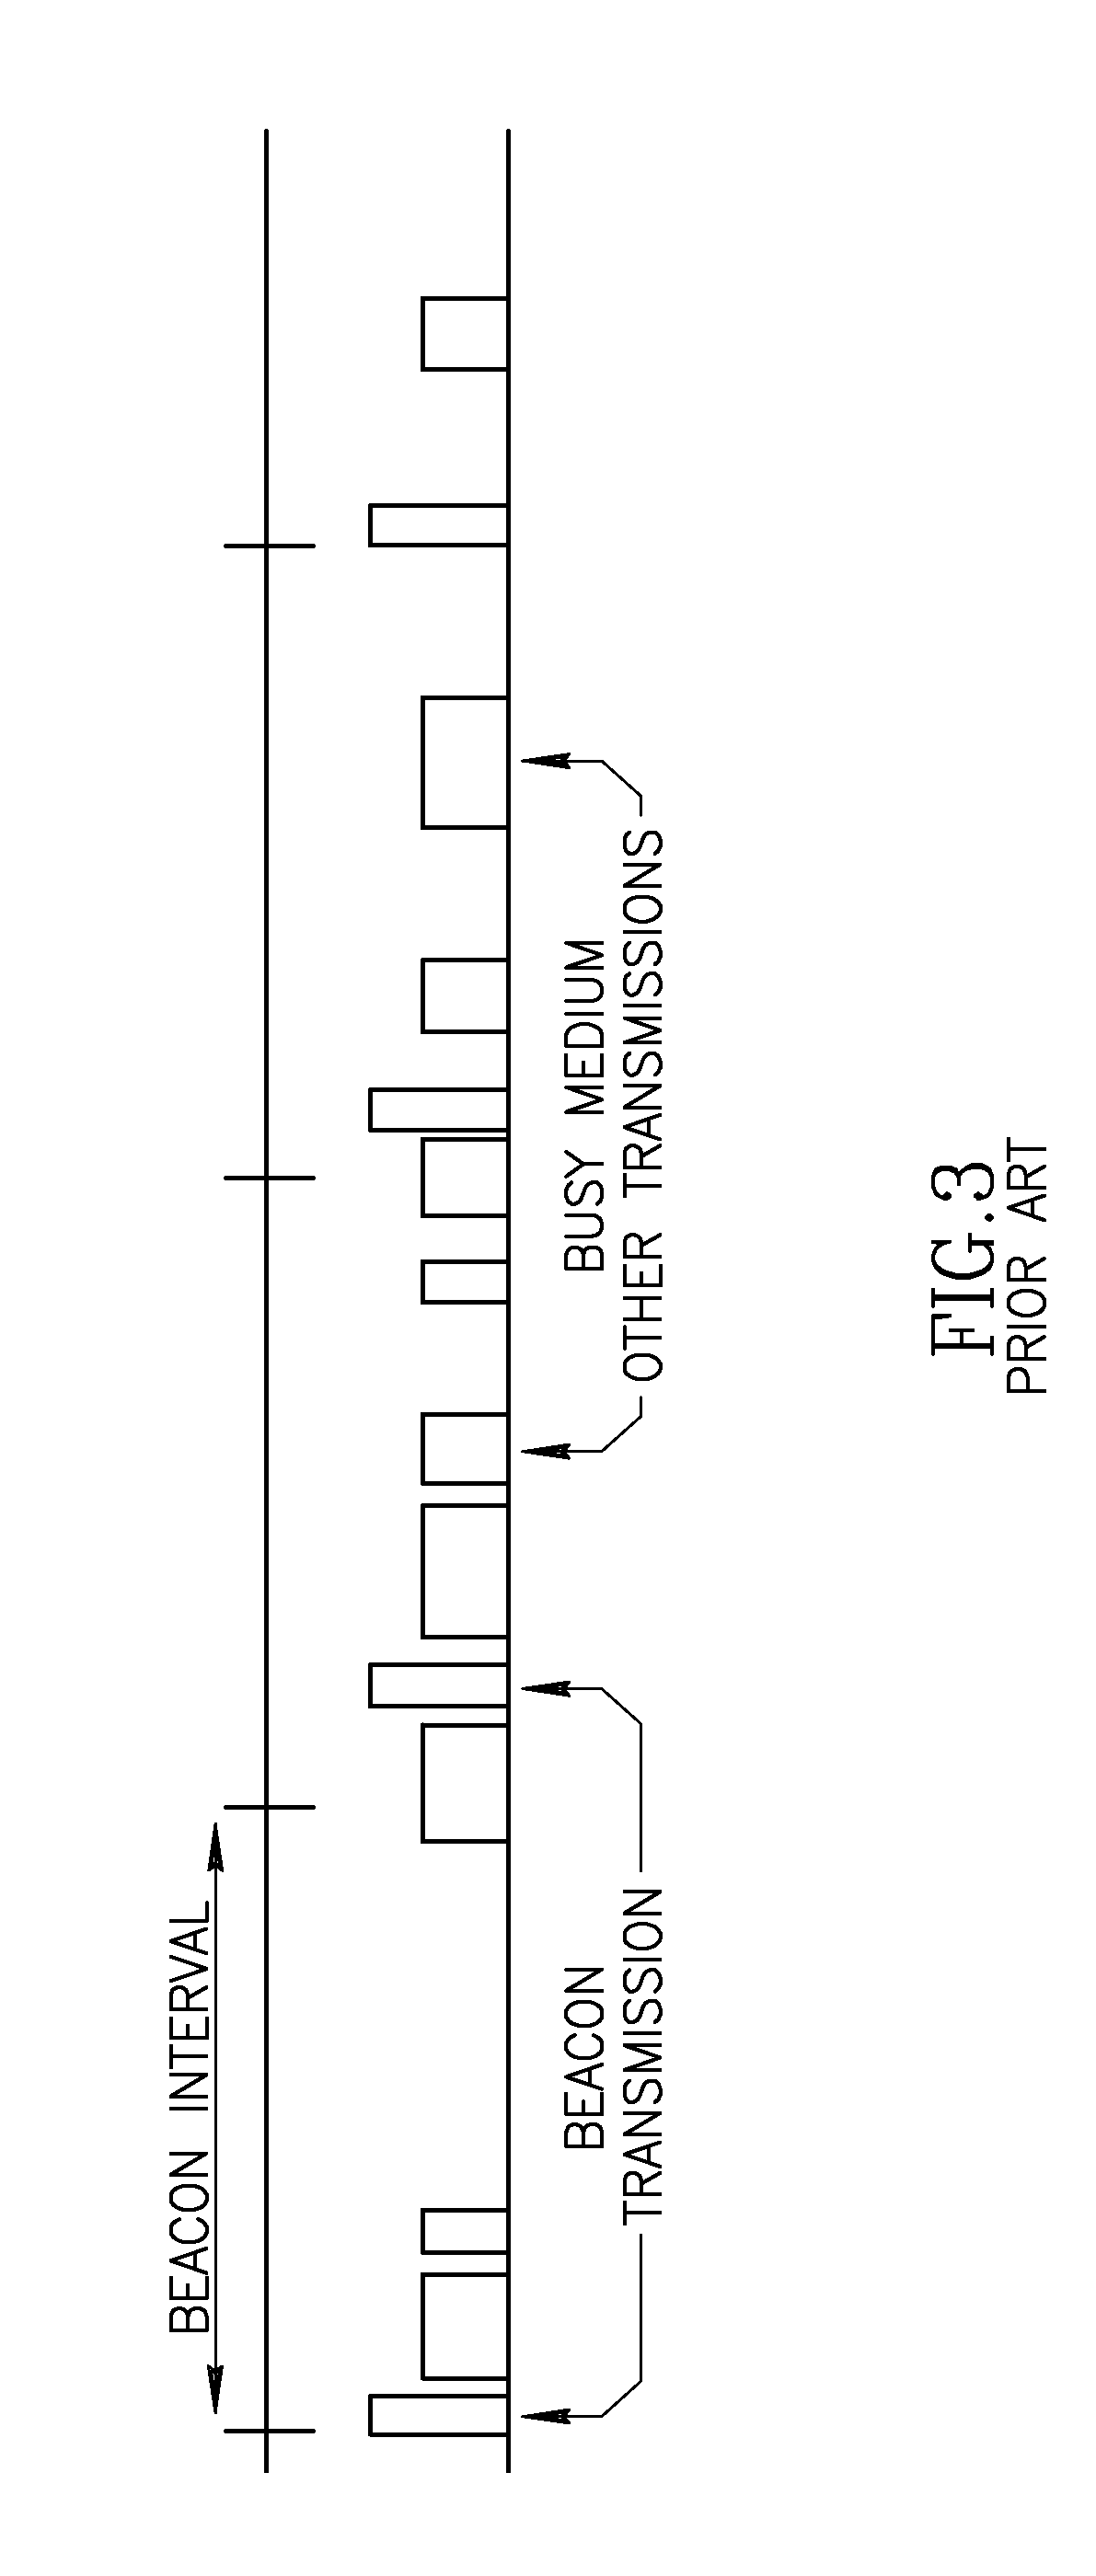 Apparatus for and method of synchronization and beaconing in a WLAN mesh network